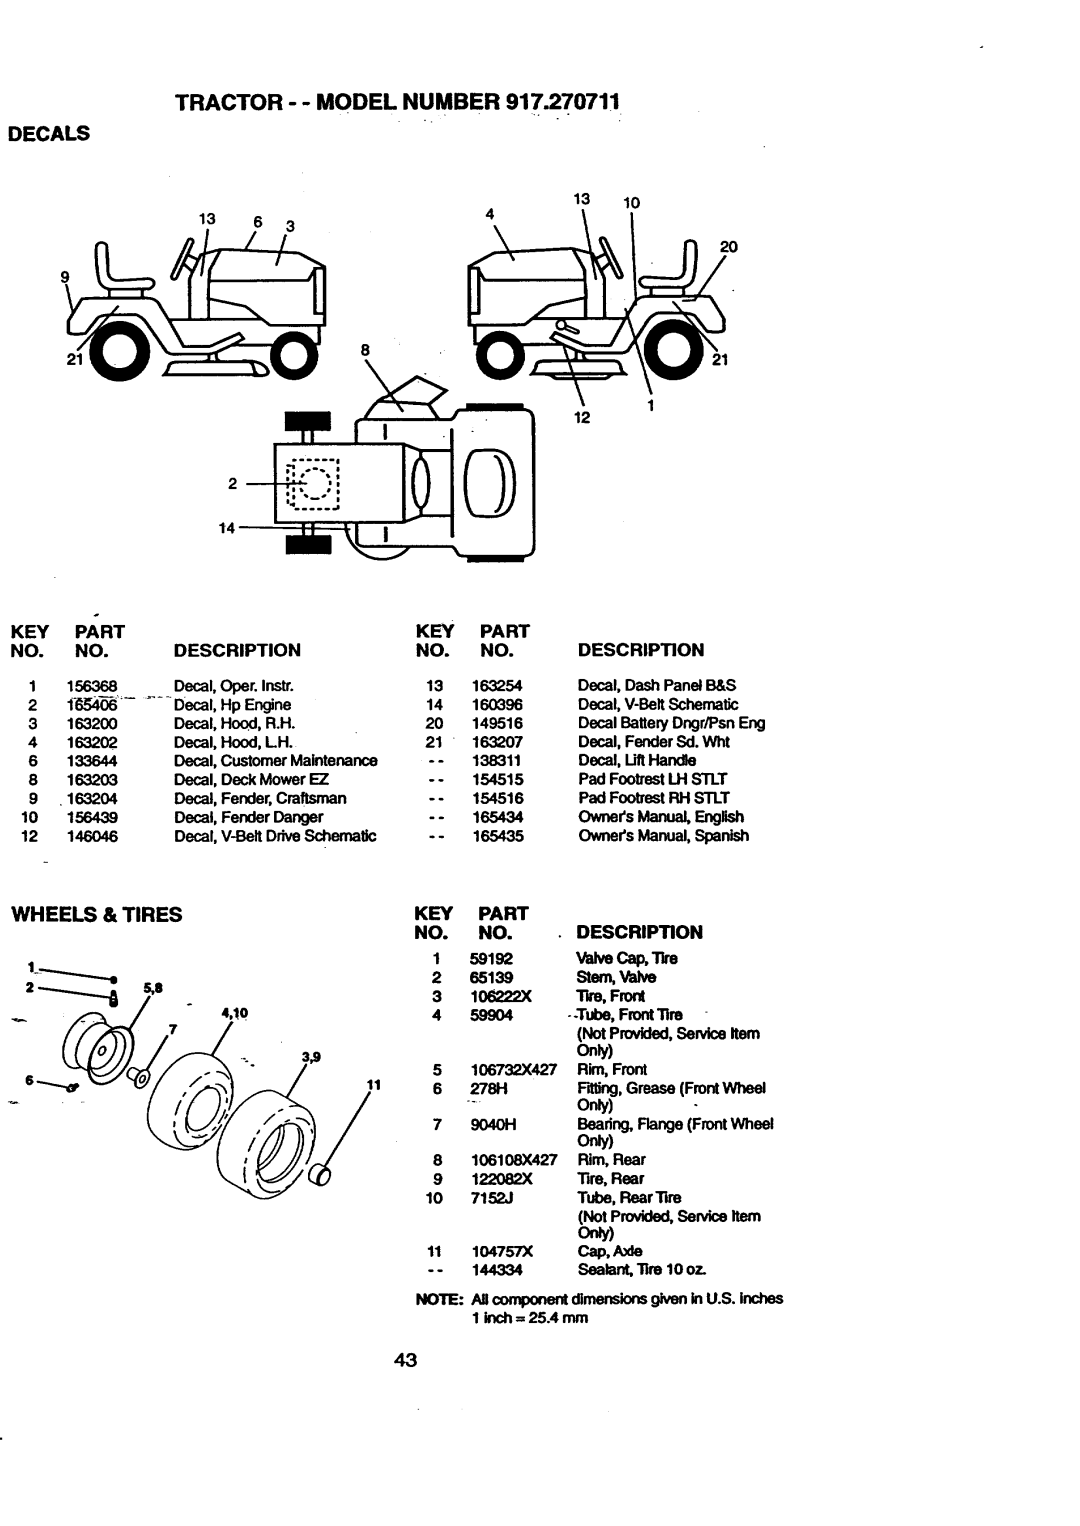 Craftsman 917.270711 owner manual Decals, Tractor - - Model Number, Only, Orgy 